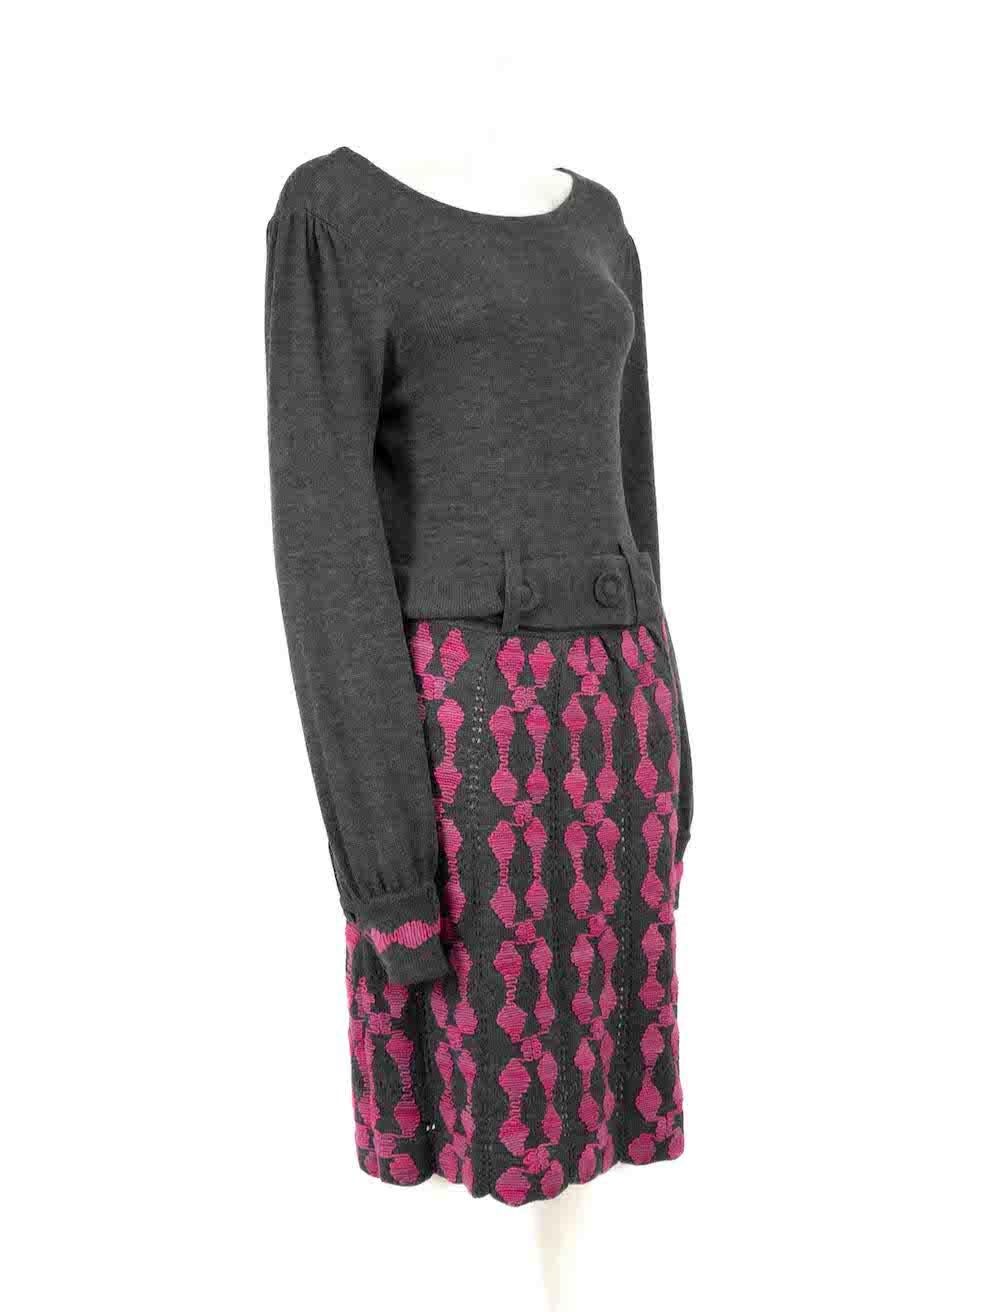 CONDITION is Never worn, with tags. No visible wear to dress is evident on this new Tibi designer resale item.
 
 
 
 Details
 
 
 Grey
 
 Wool
 
 Knit dress
 
 Long sleeves
 
 Midi
 
 Round neck
 
 Pink abstract skirt
 
 Back zip and hook